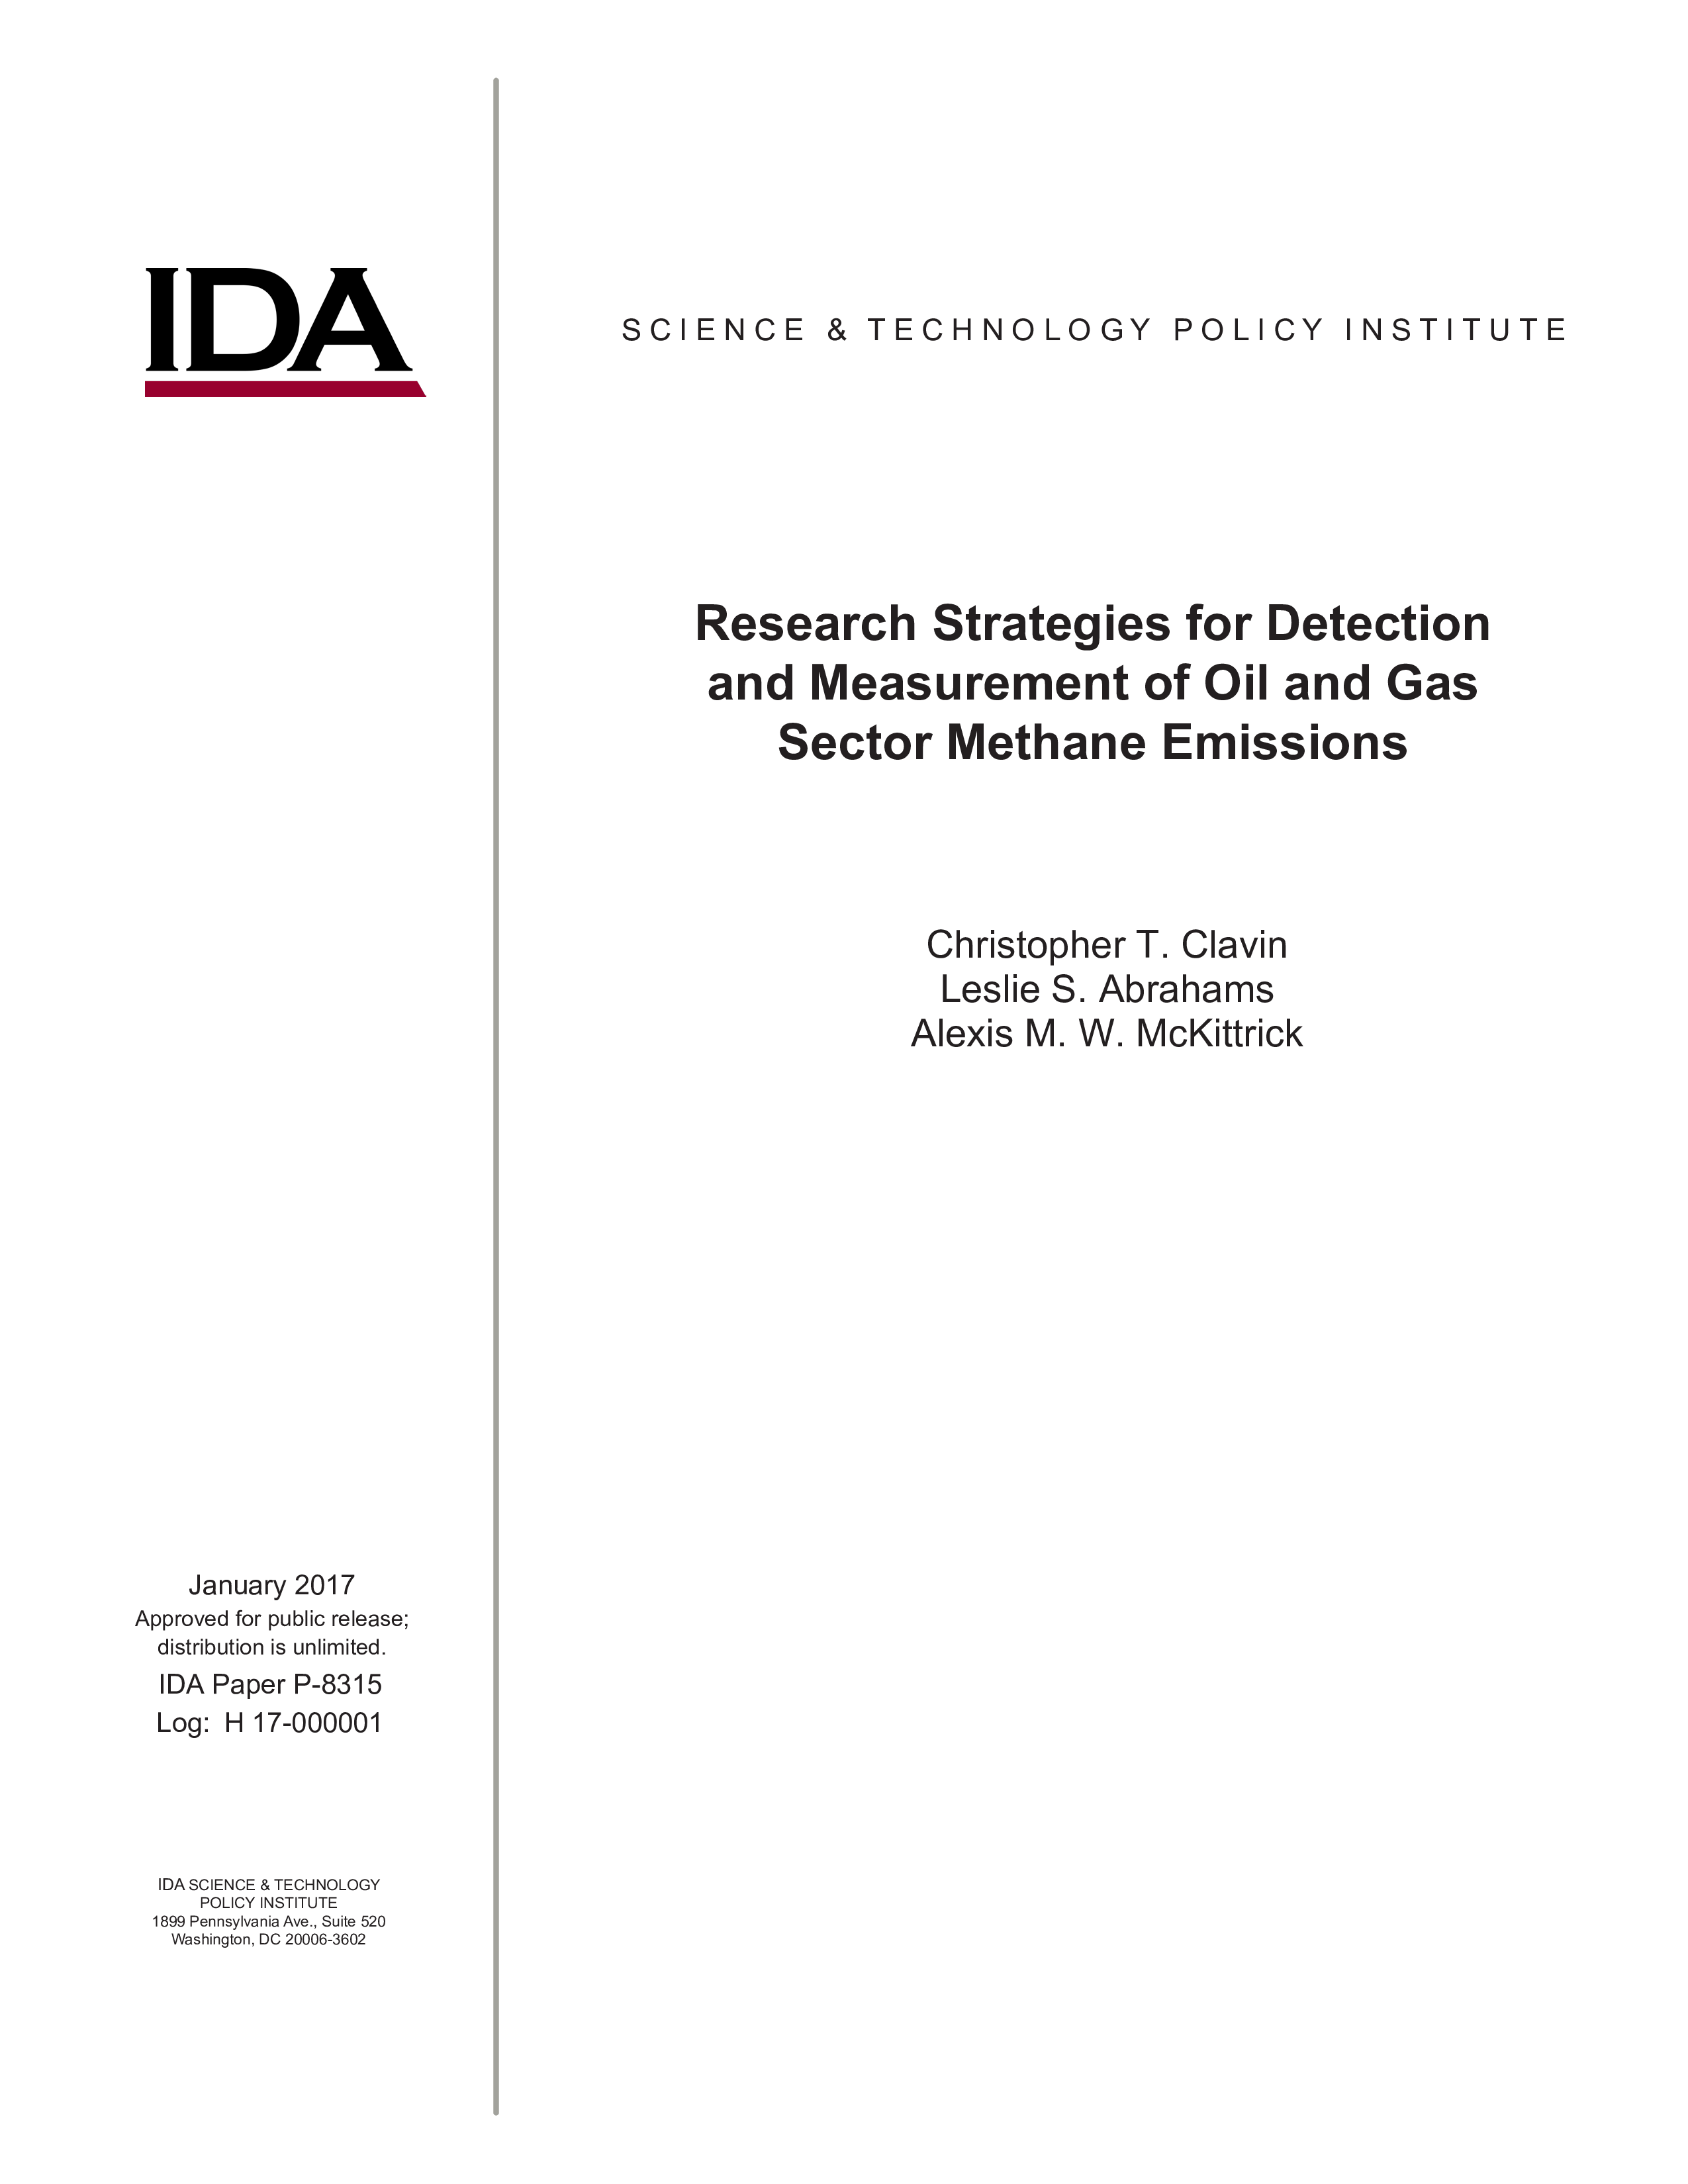 Research Strategies for Detection and Measurement of Oil and Gas Sector Methane Emissions